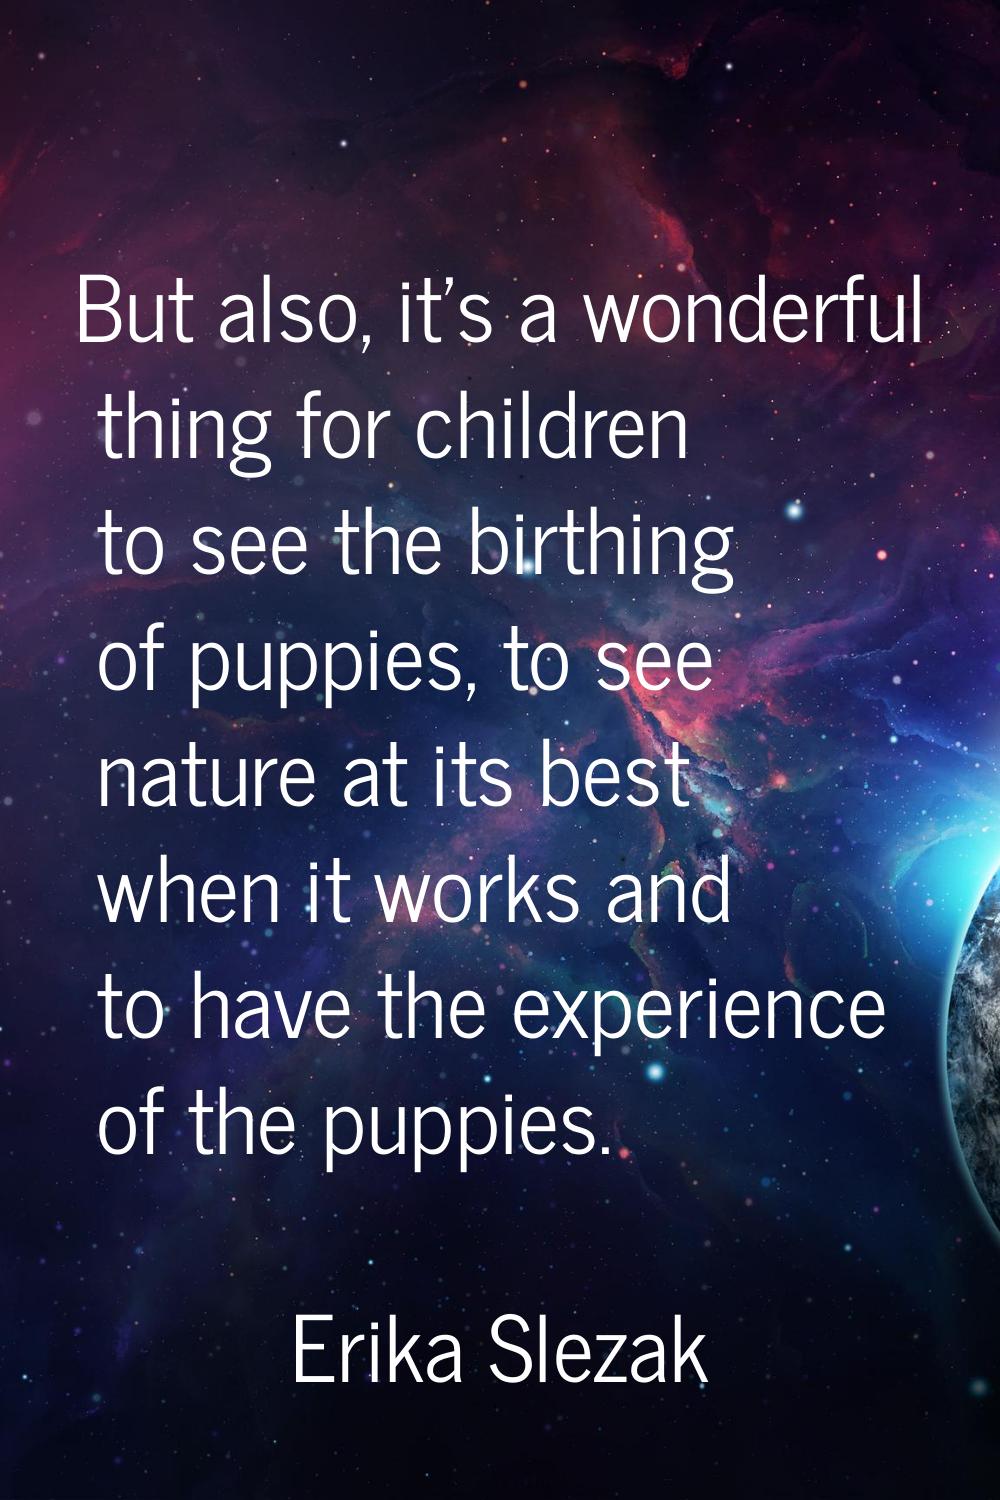 But also, it's a wonderful thing for children to see the birthing of puppies, to see nature at its 